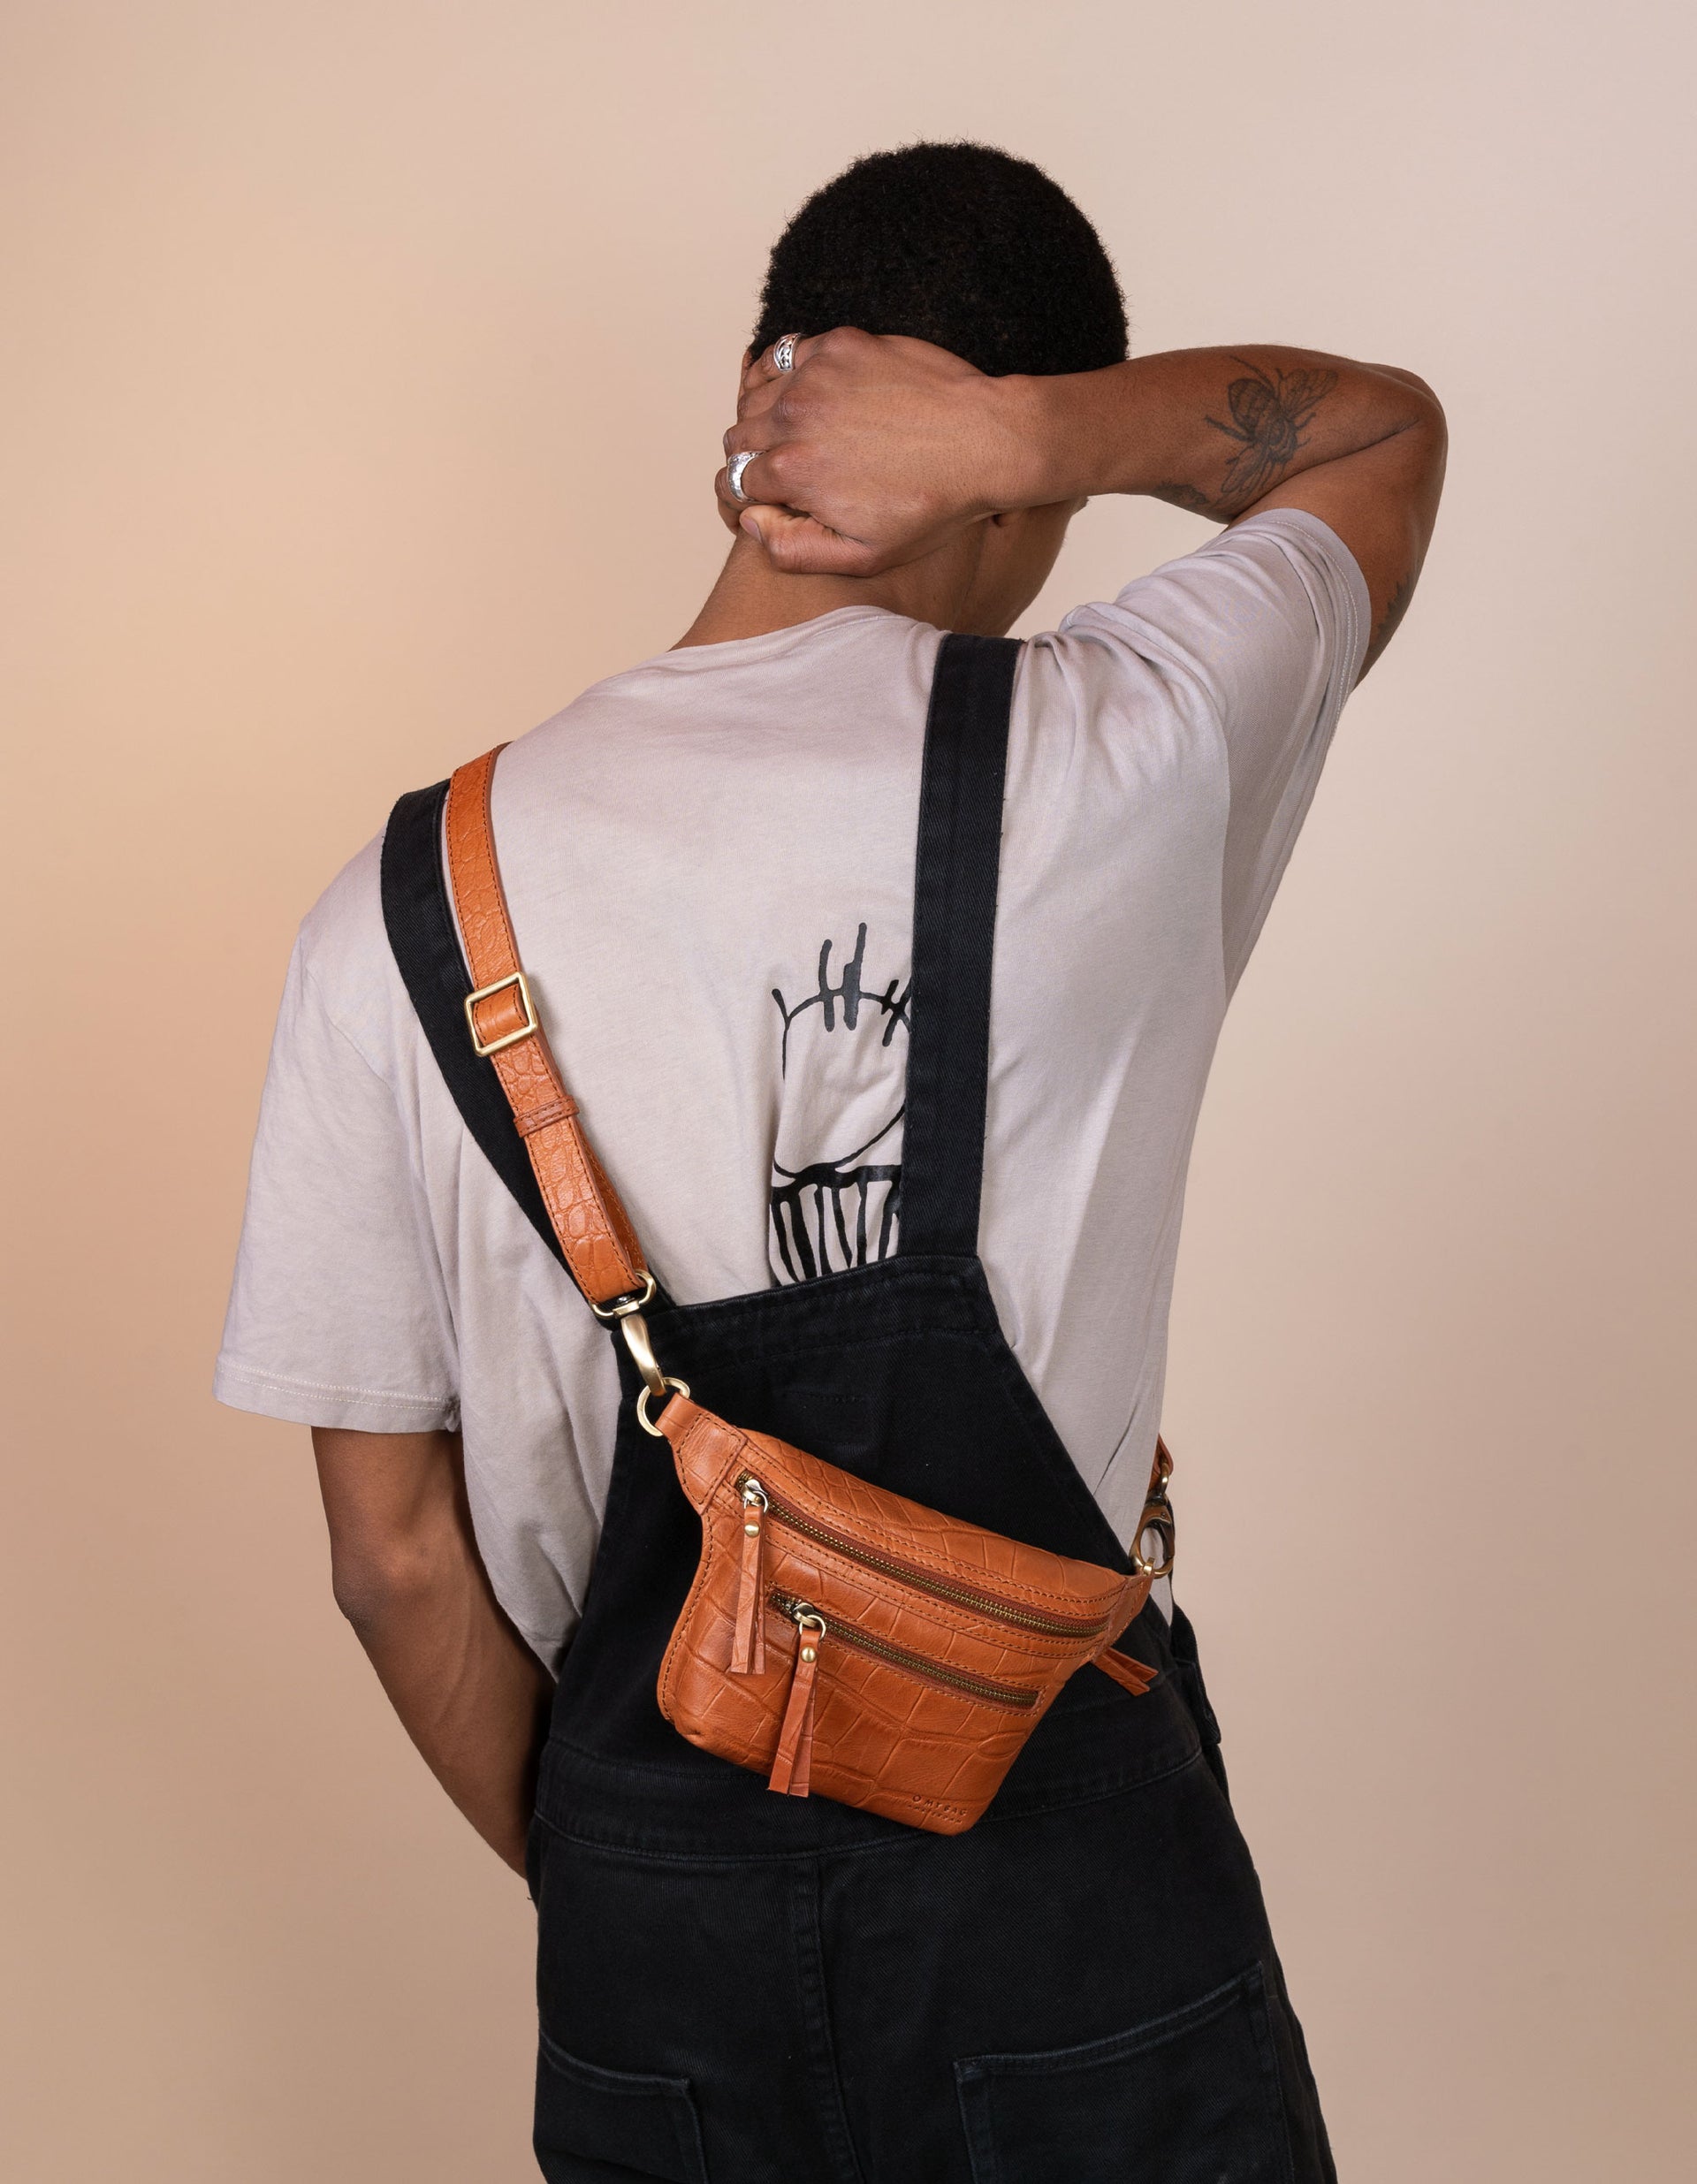 Wild Oak Croco Leather fanny pack. Square shape with an adjustable strap. Male product image. Back View.